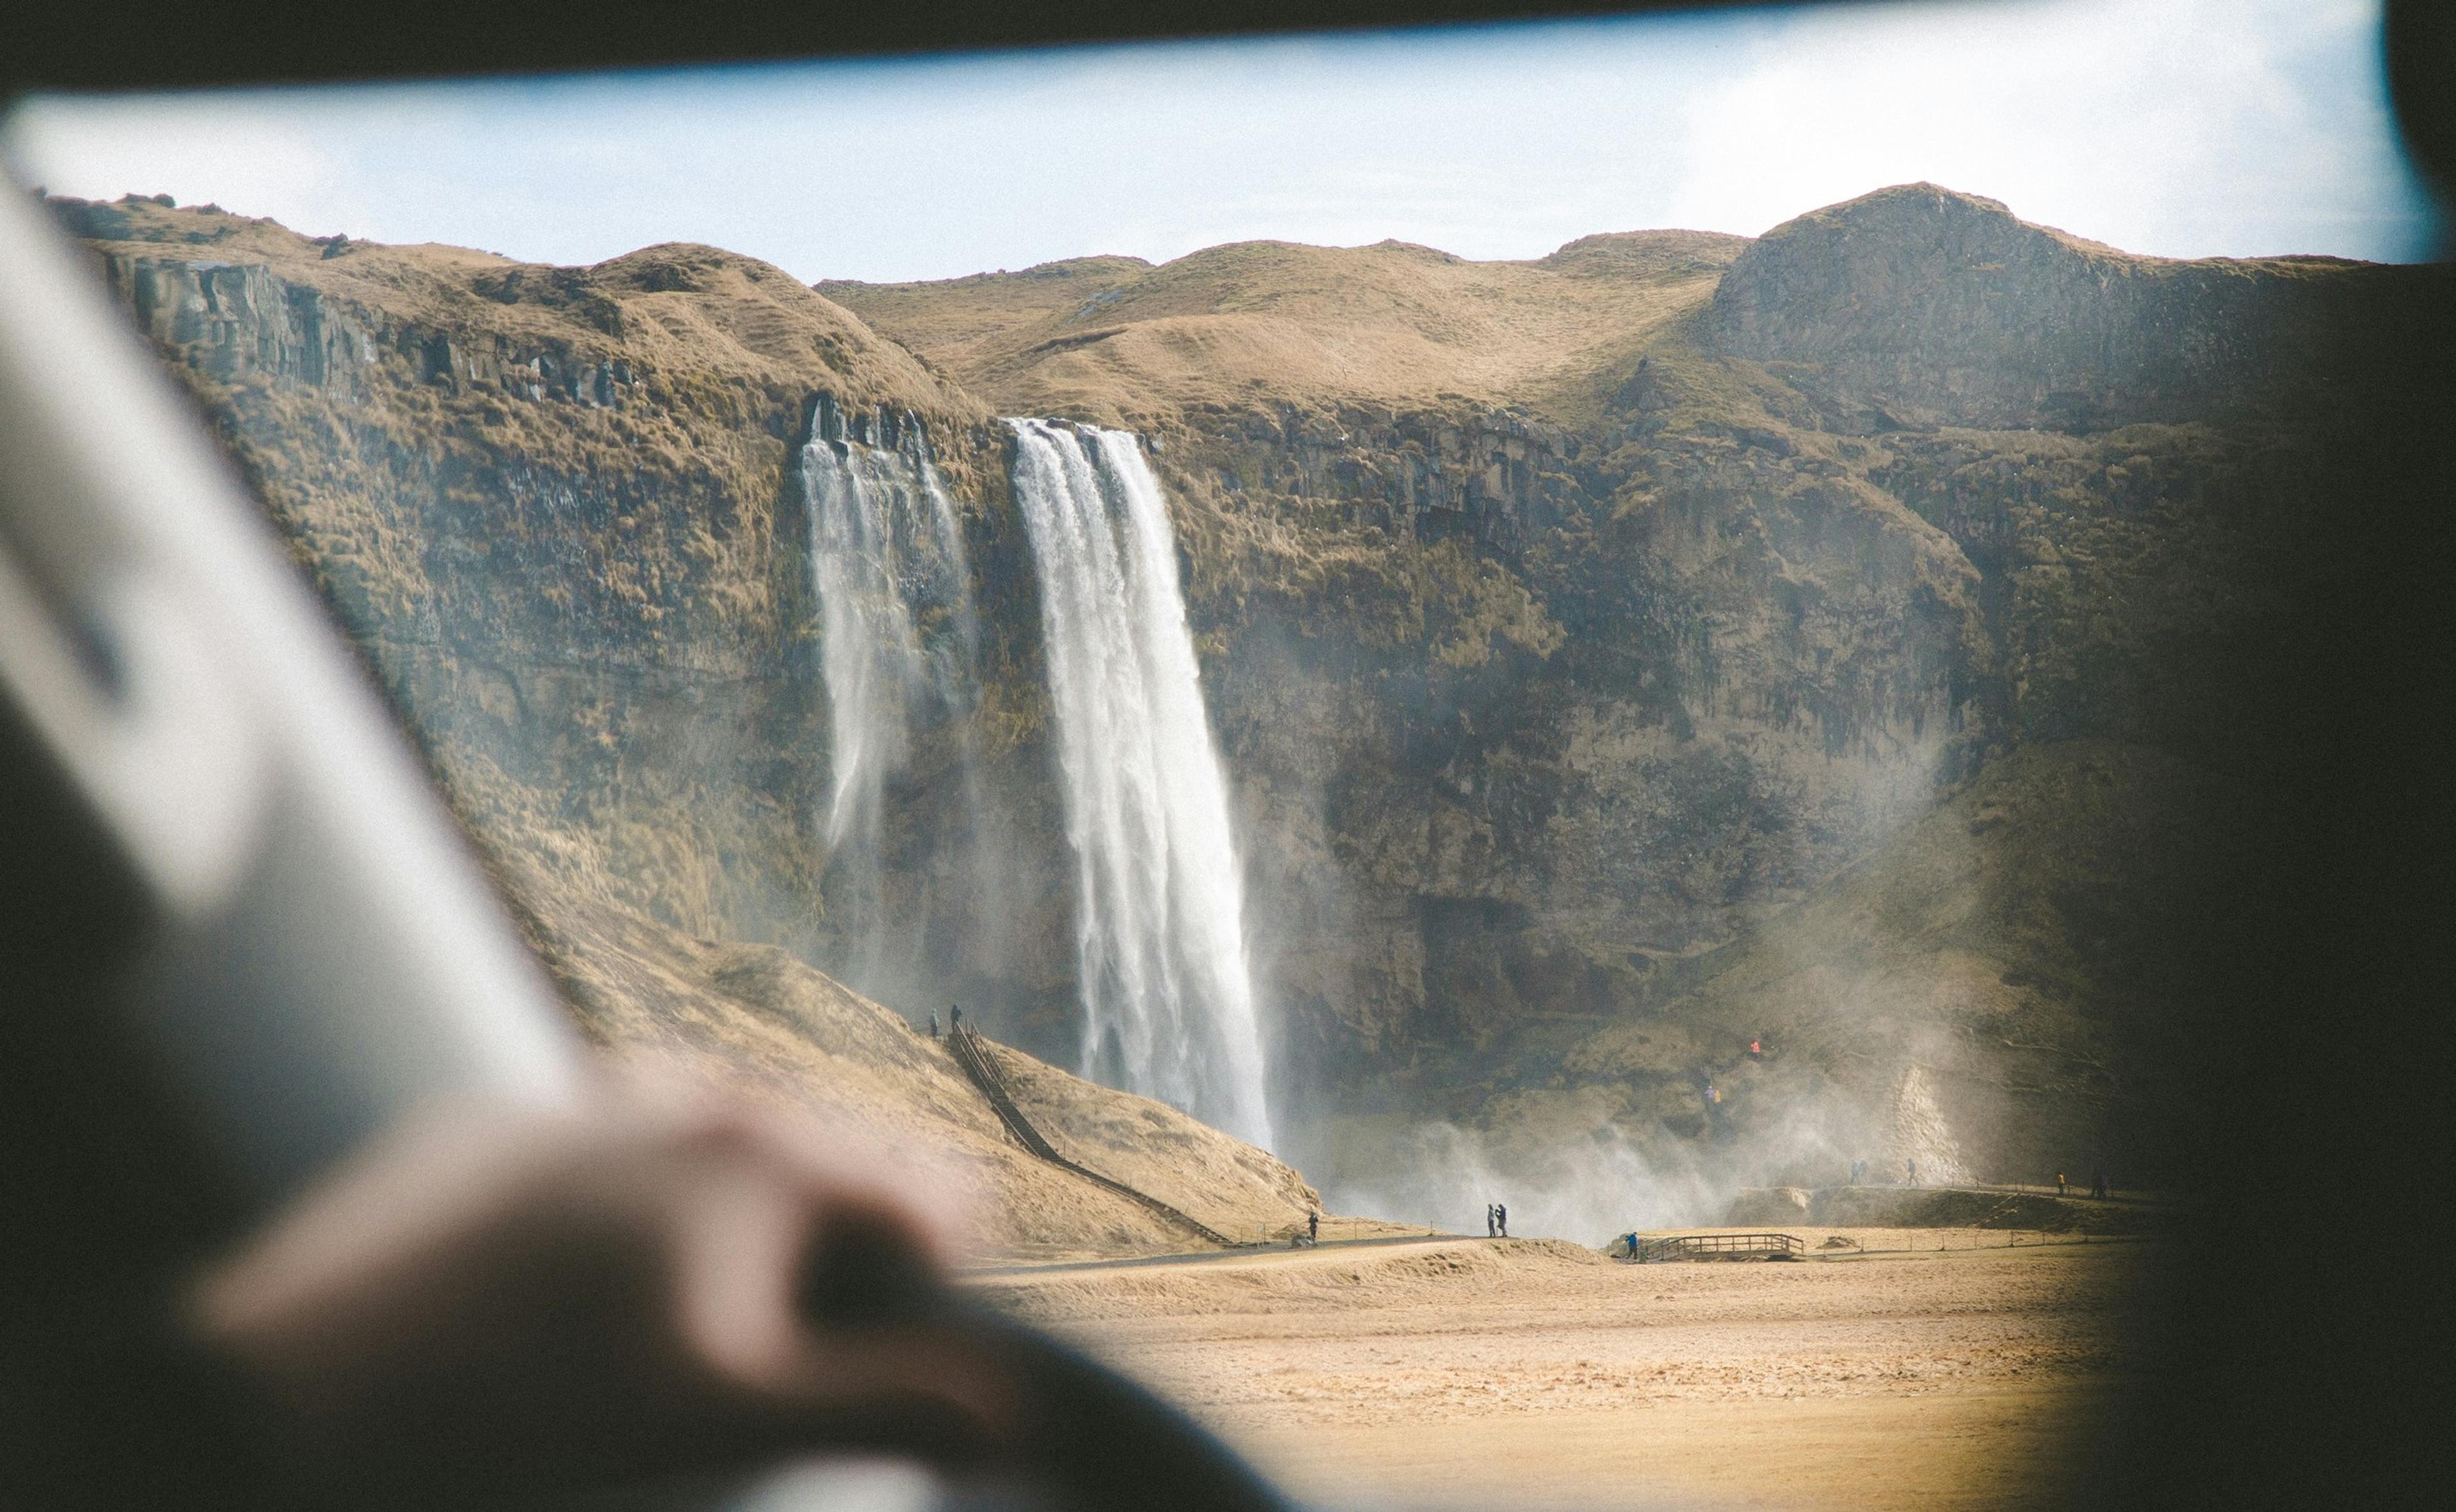 View from inside a car showing a person looking at a large waterfall cascading over a cliff with mist rising from its base.